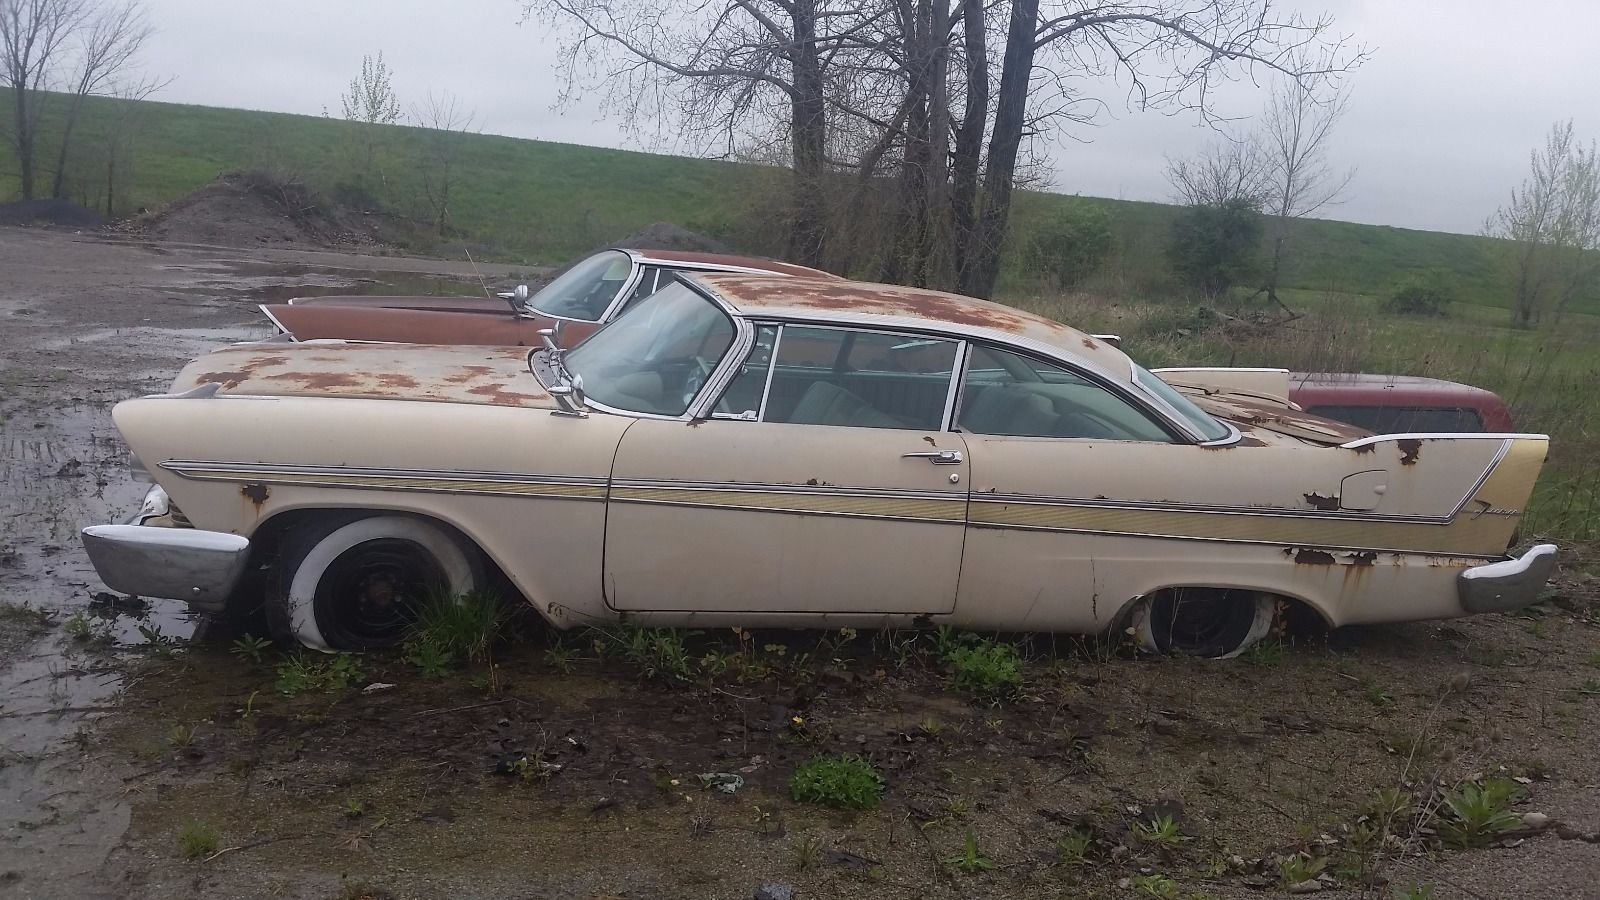 eBay Find: It’s Rusting, Neglected, And Needs A Lot Of Work, But This 1958 Plymouth Fury Can Be Something…